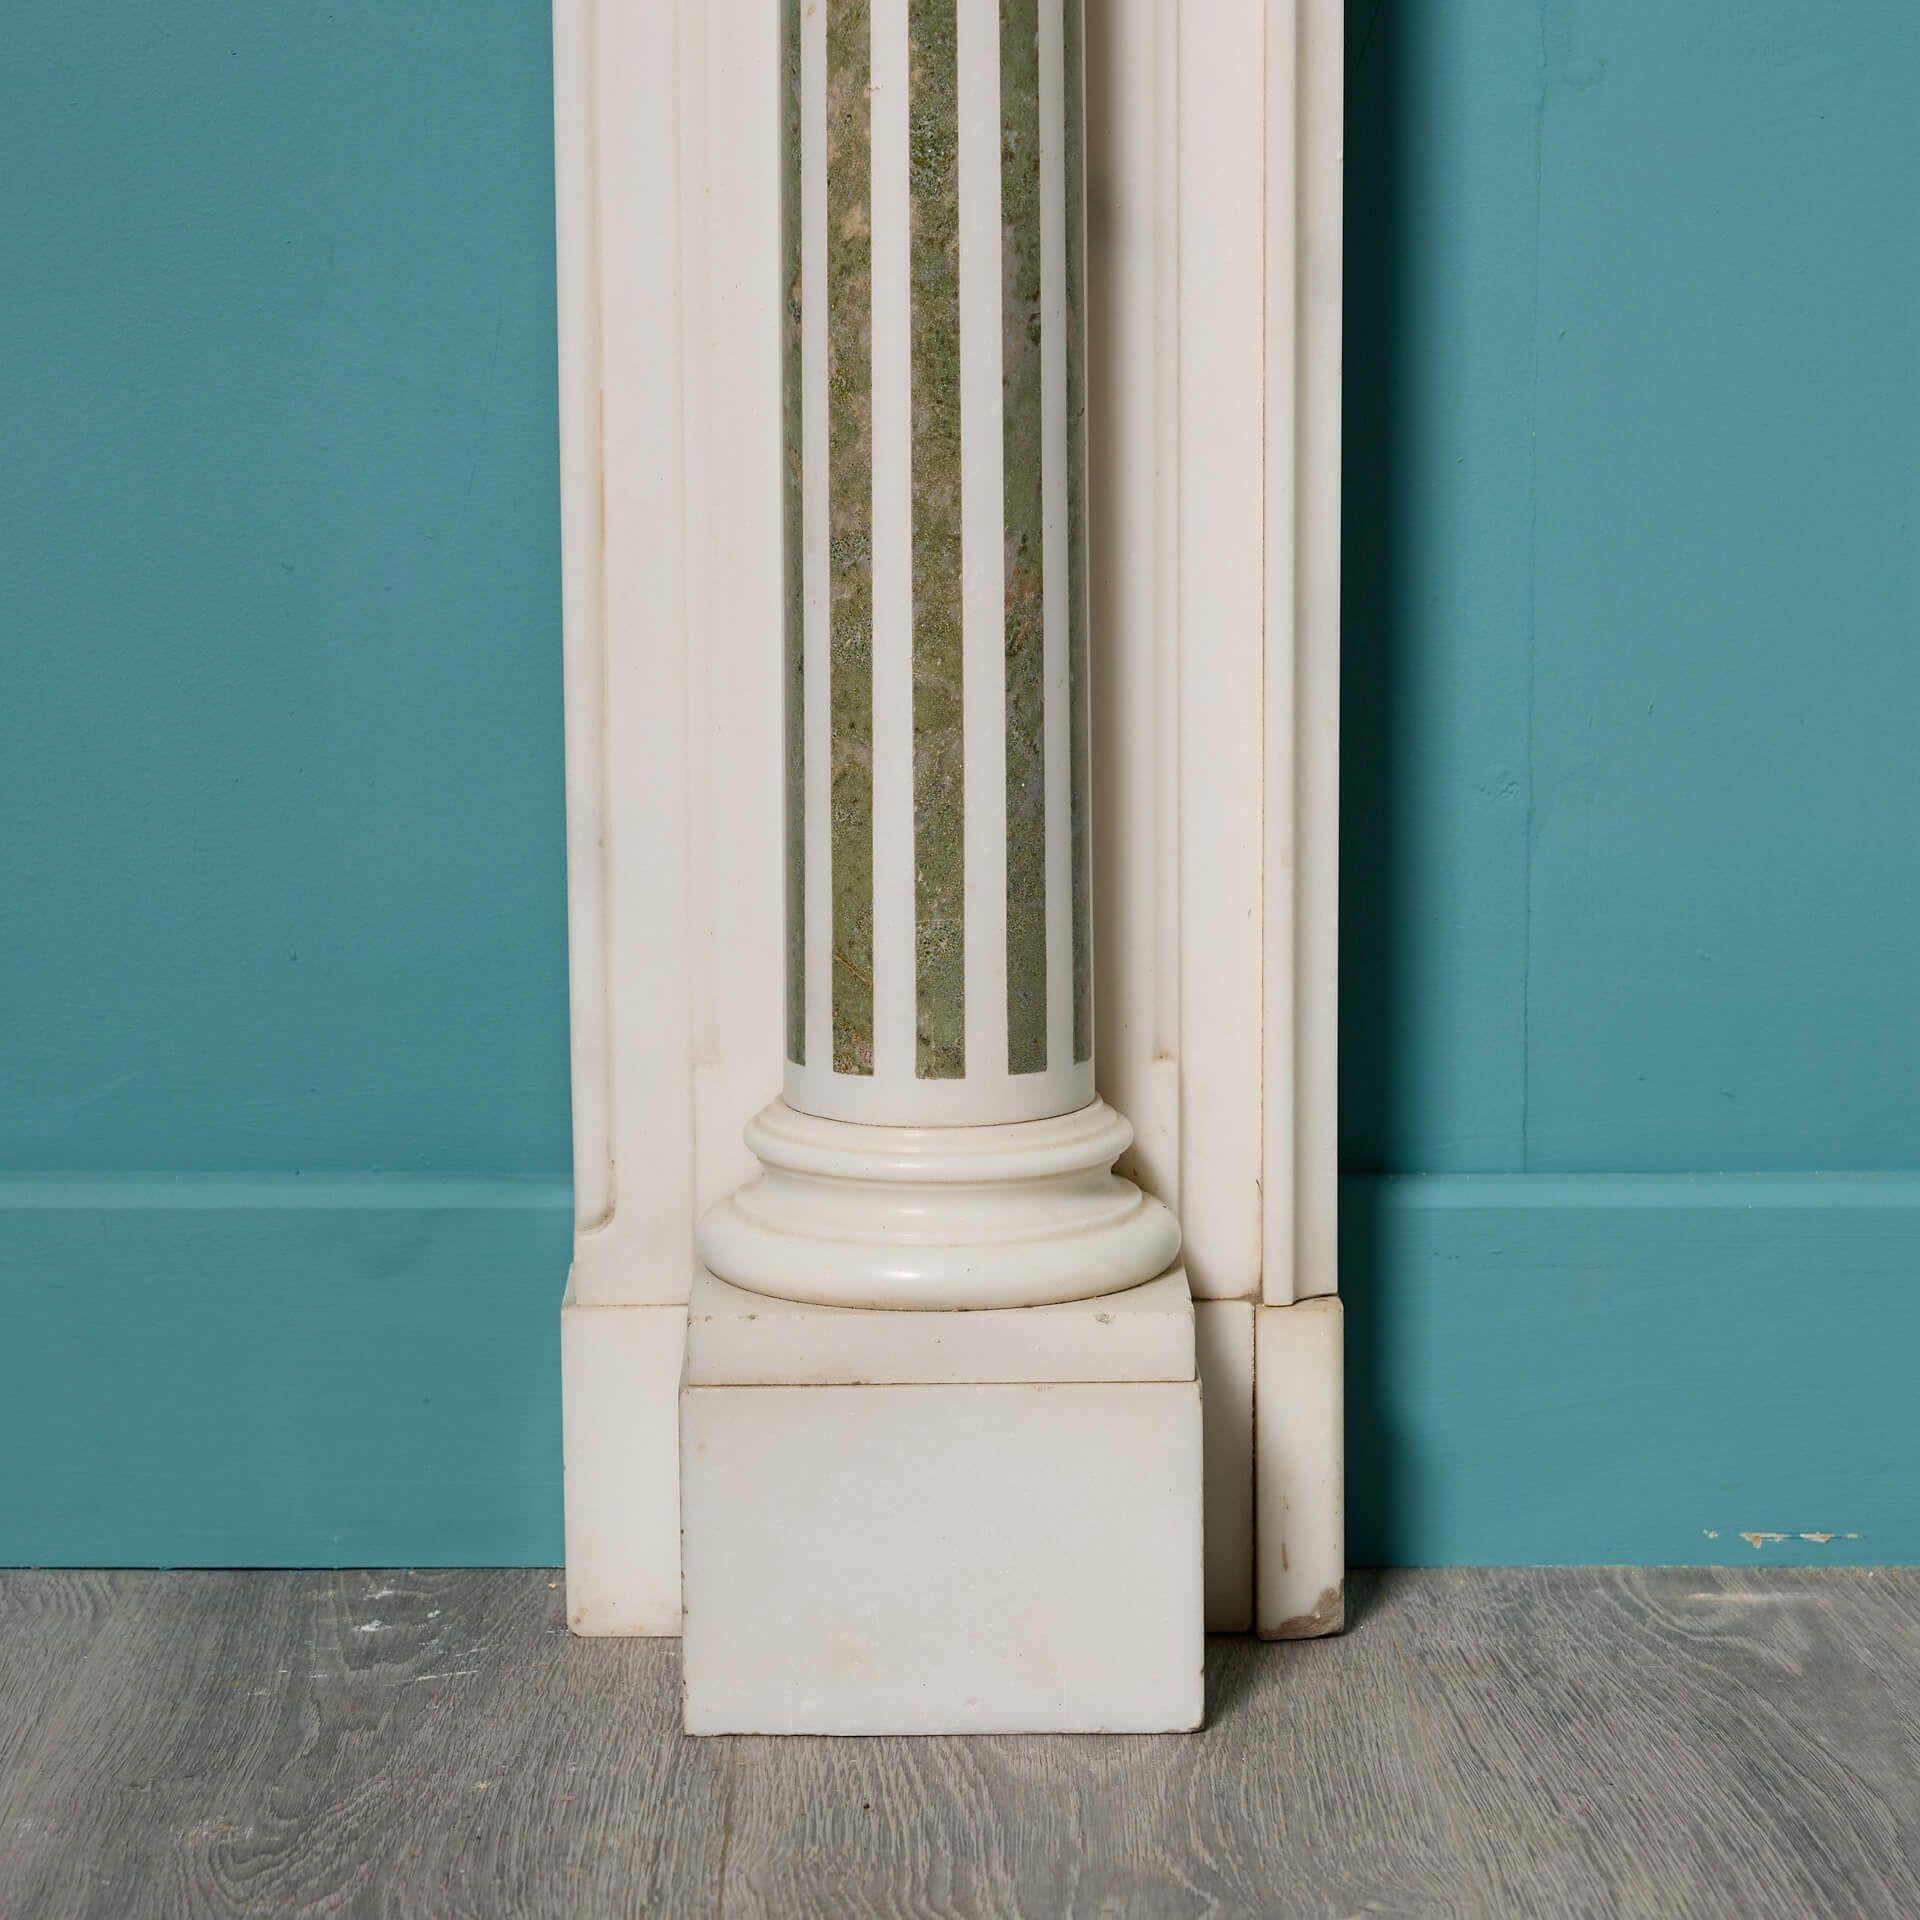 Antique White Statuary & Green Connemara Marble Fireplace In Fair Condition For Sale In Wormelow, Herefordshire